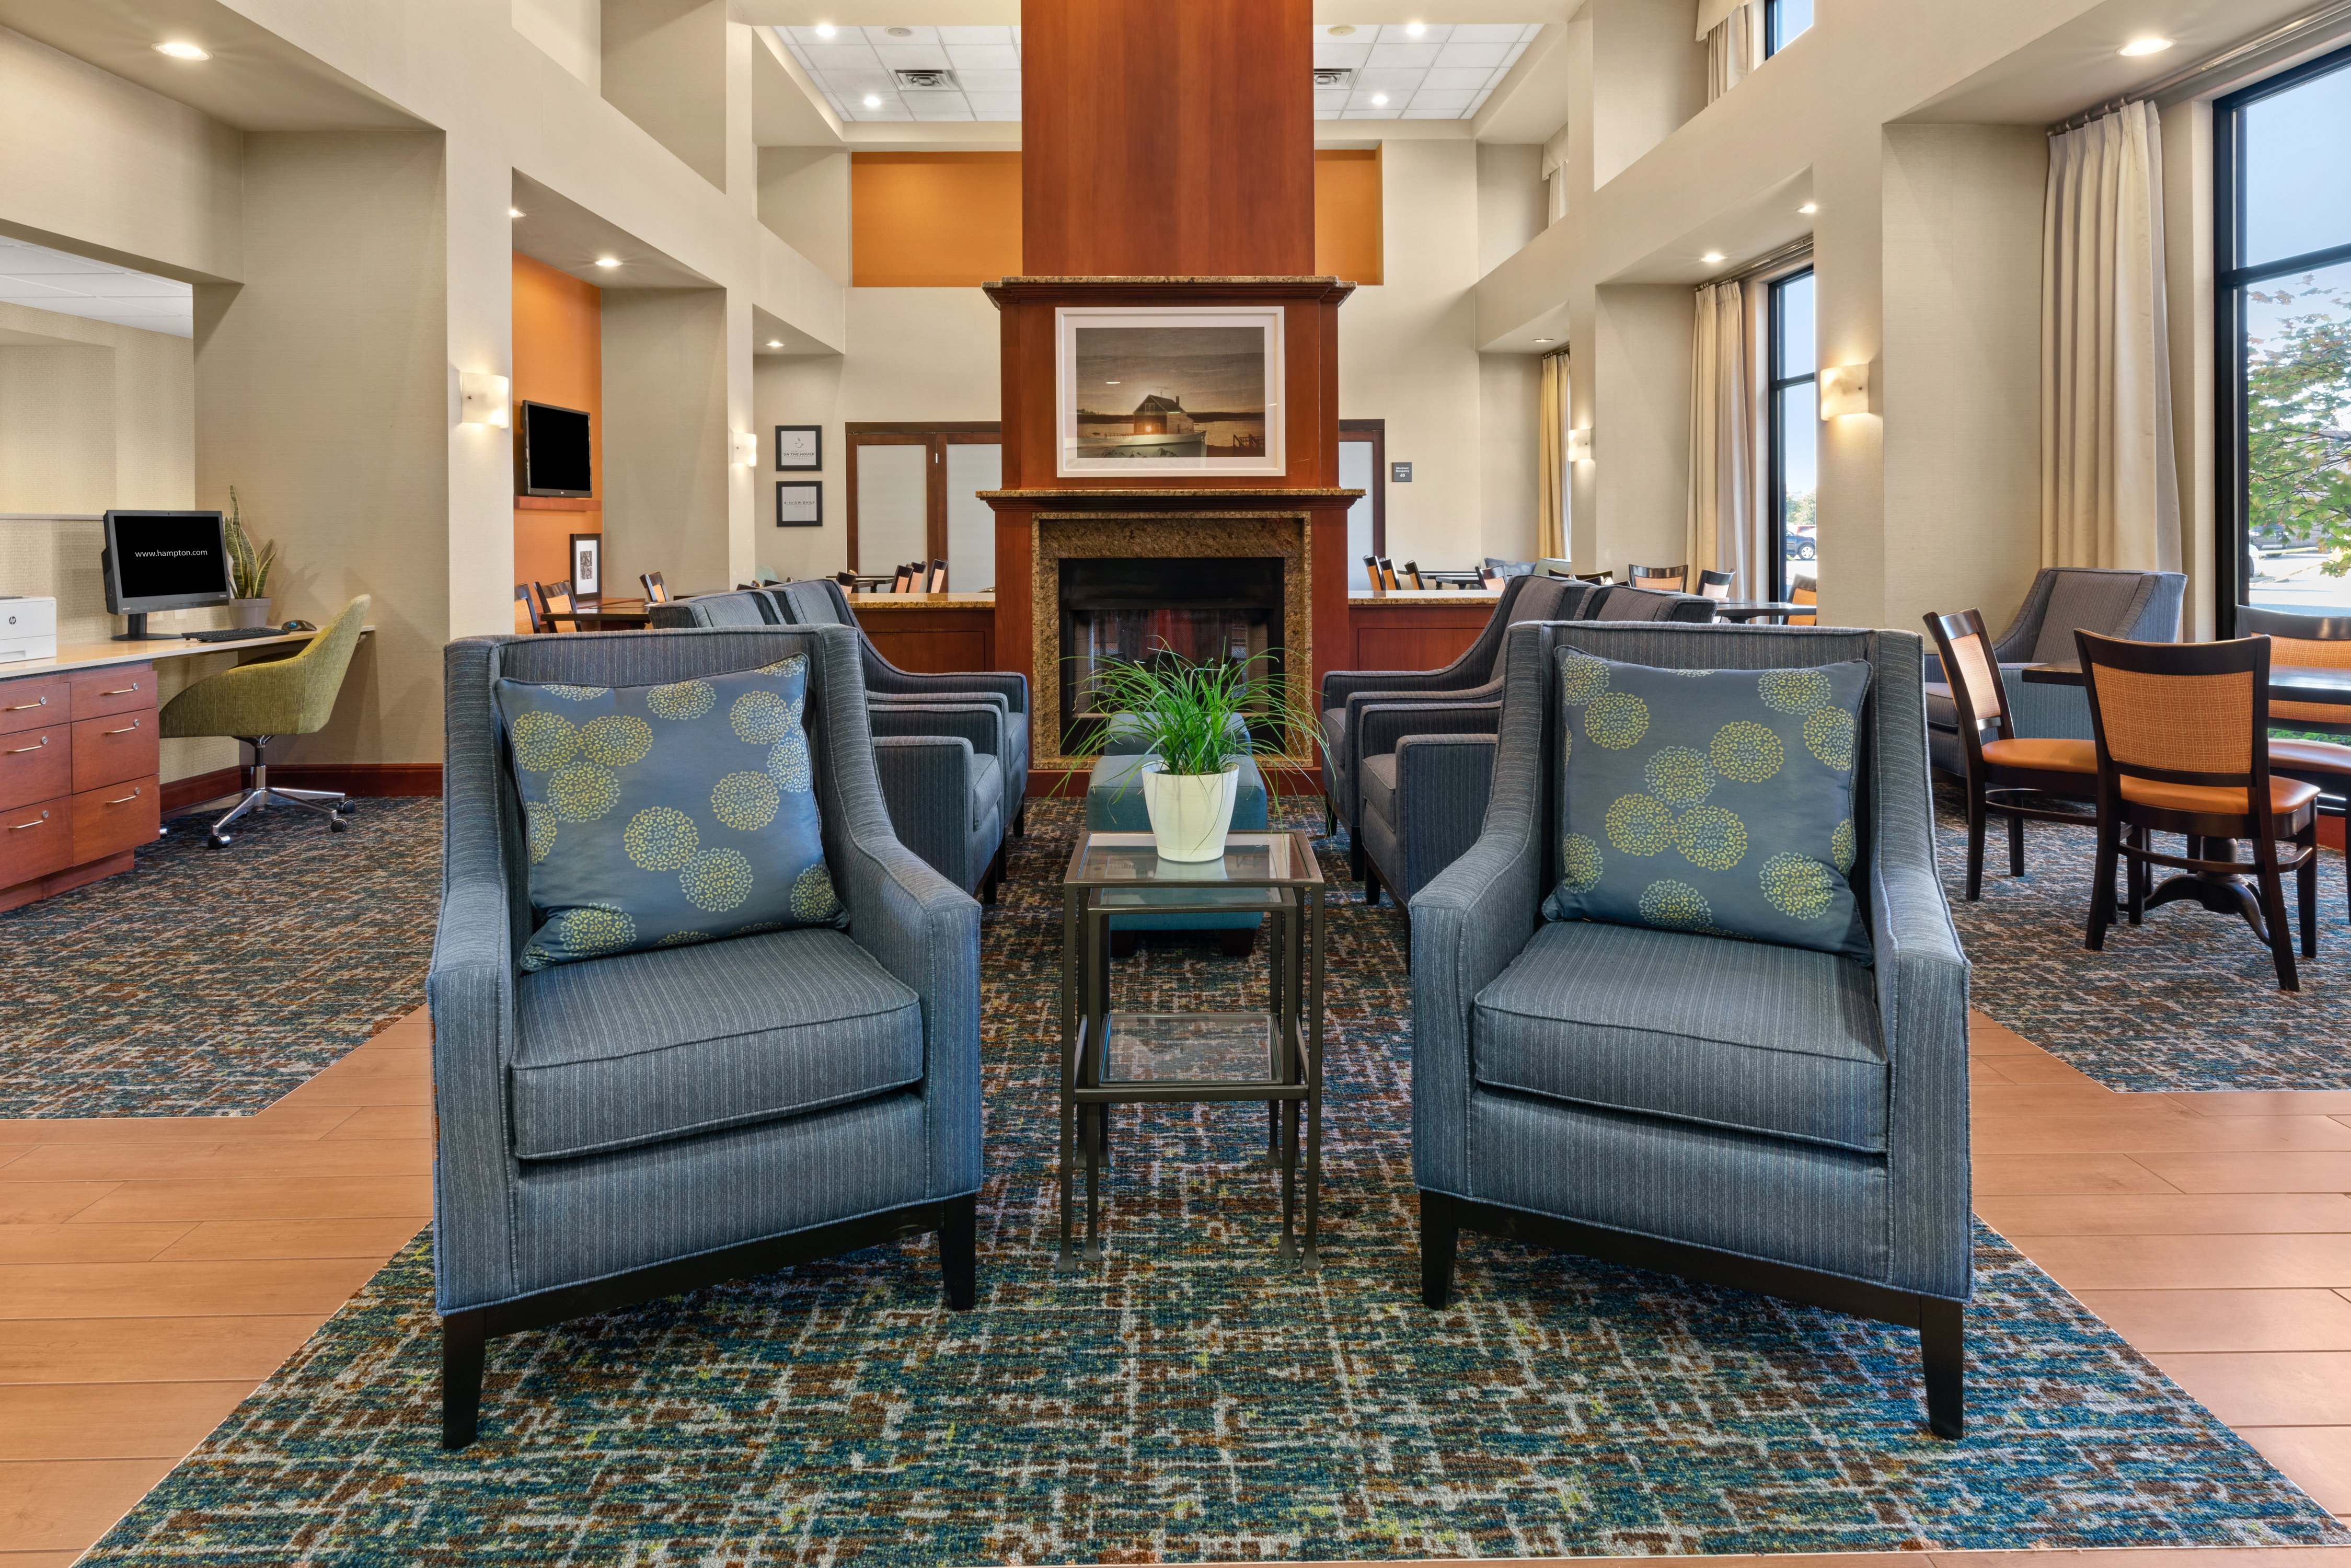 Unwind in our comfortable seating